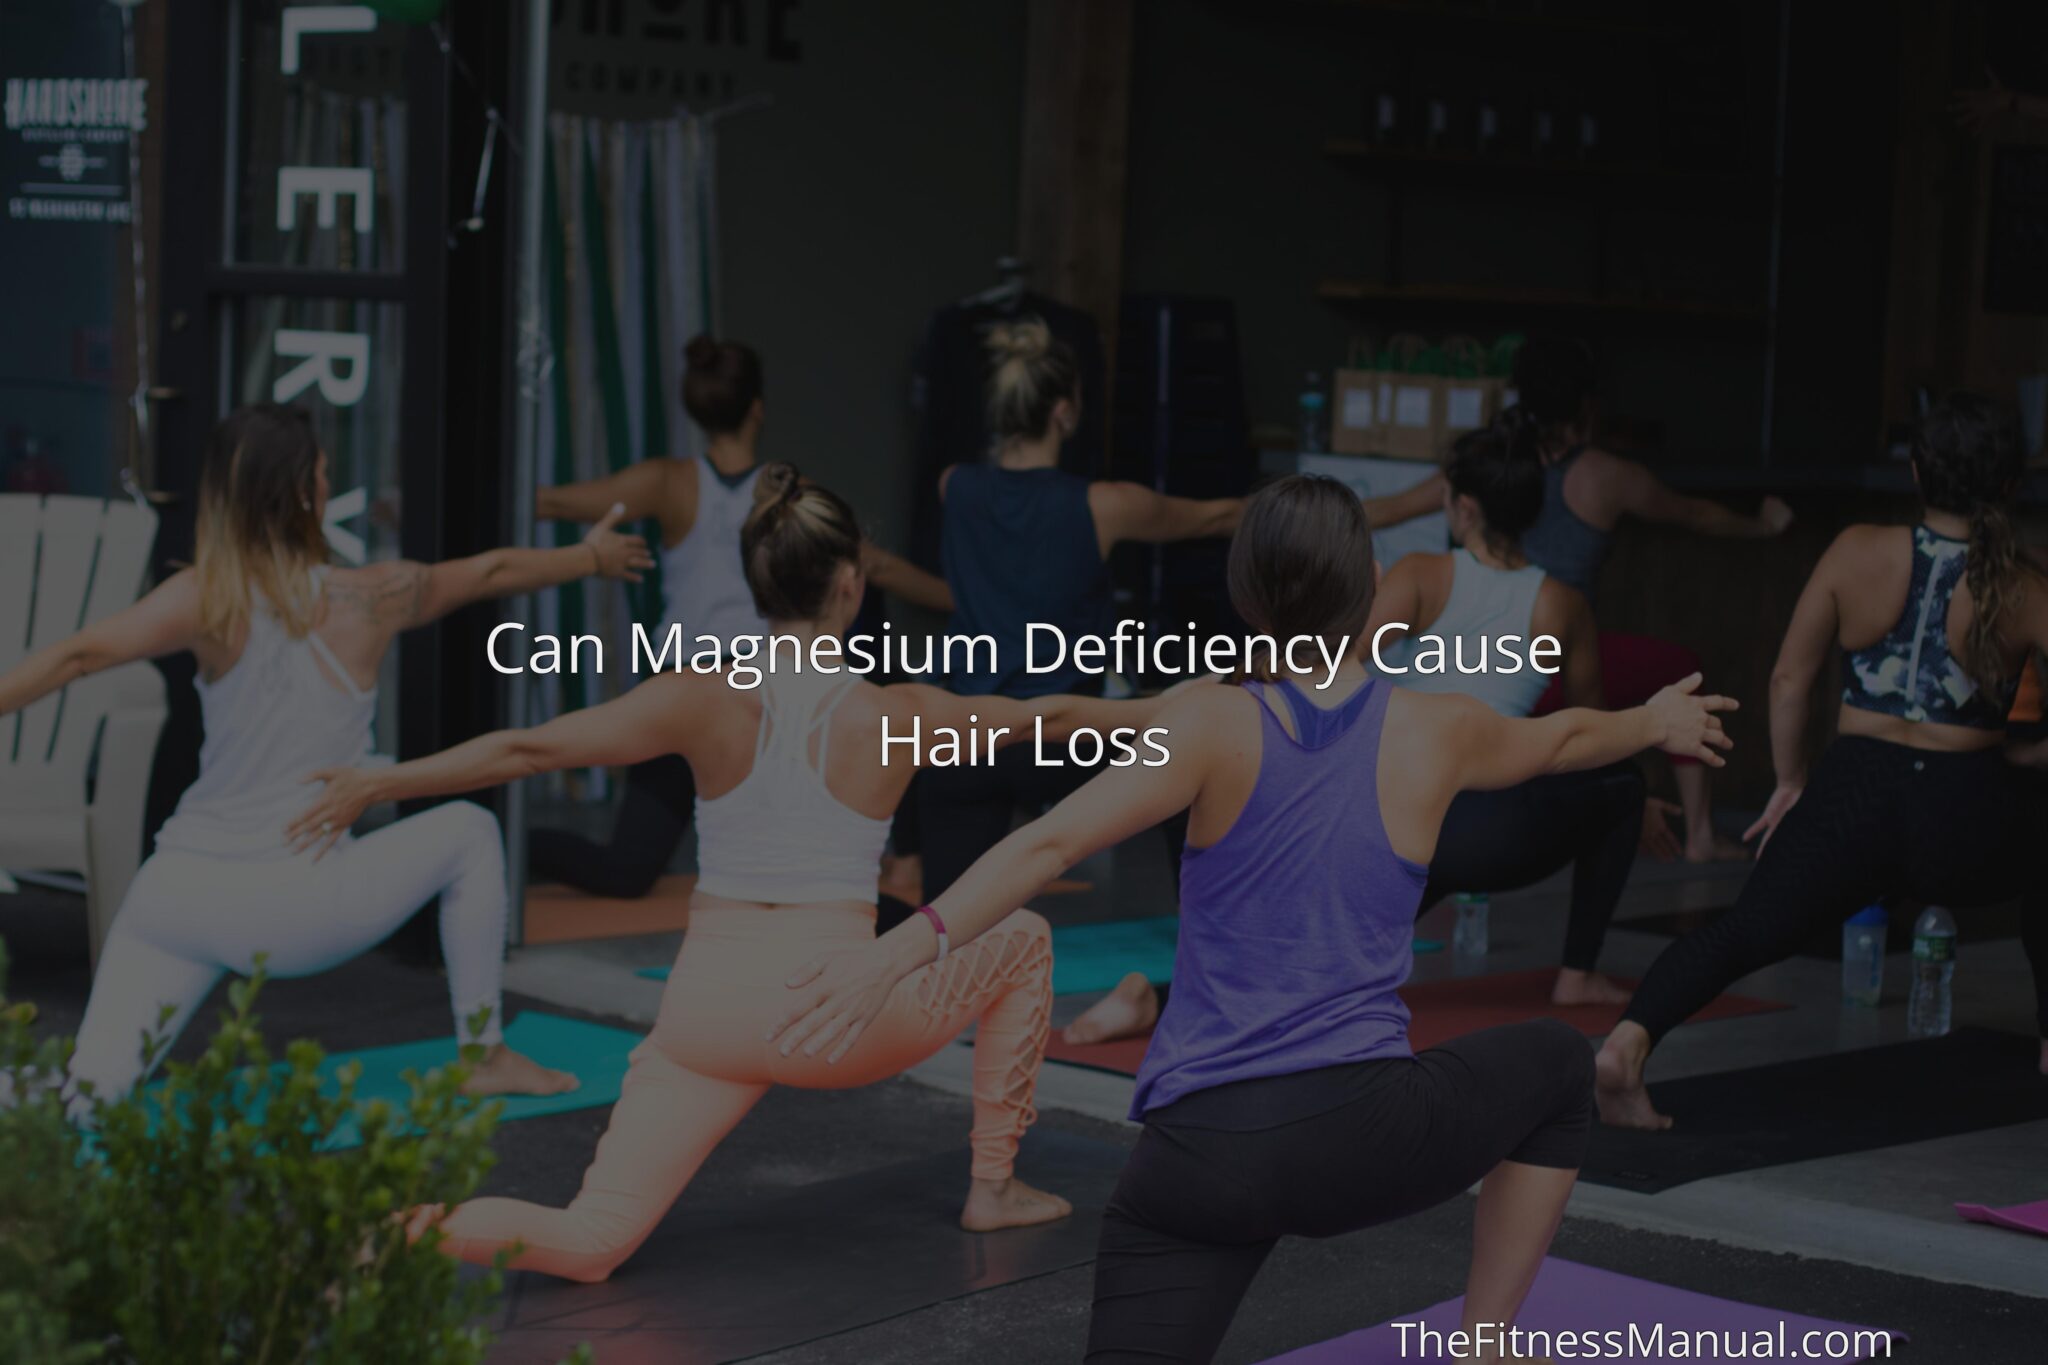 Can Magnesium Deficiency Cause Hair Loss